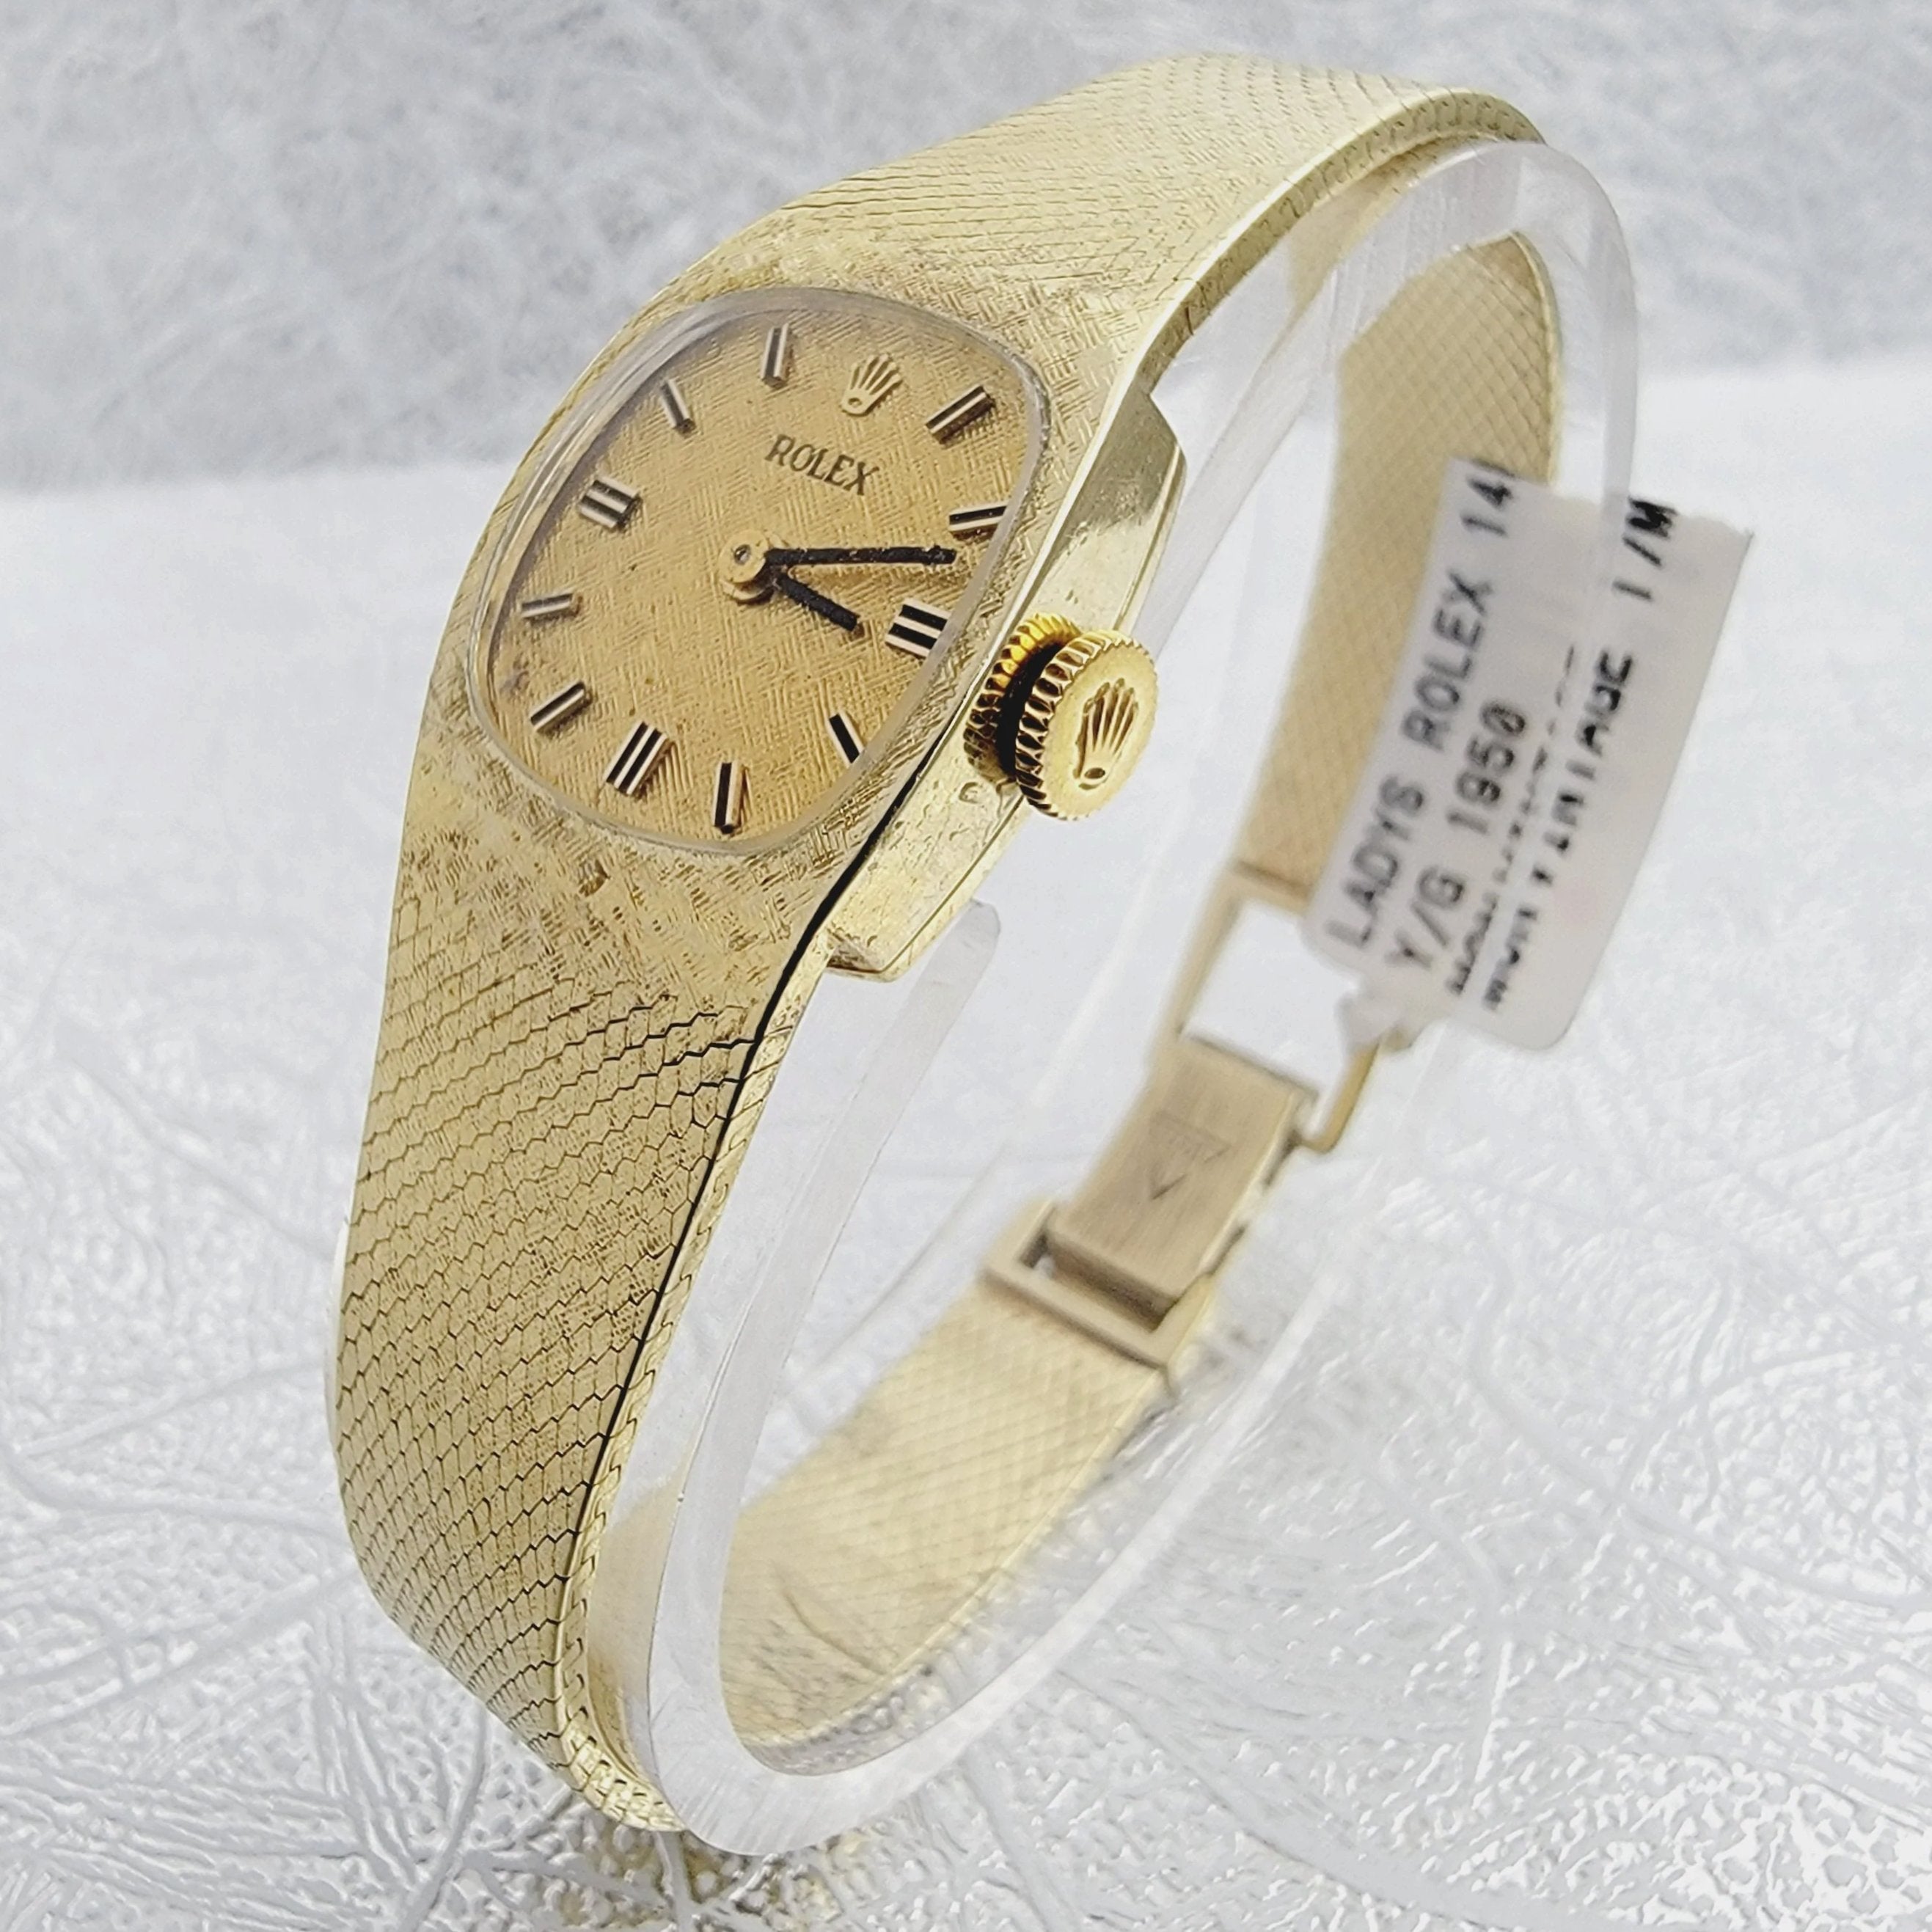 Ladies Rolex 1950's Cocktail 17mm Vintage Solid 14K Yellow Gold Watch with Gold Dial. (Pre-Owned)